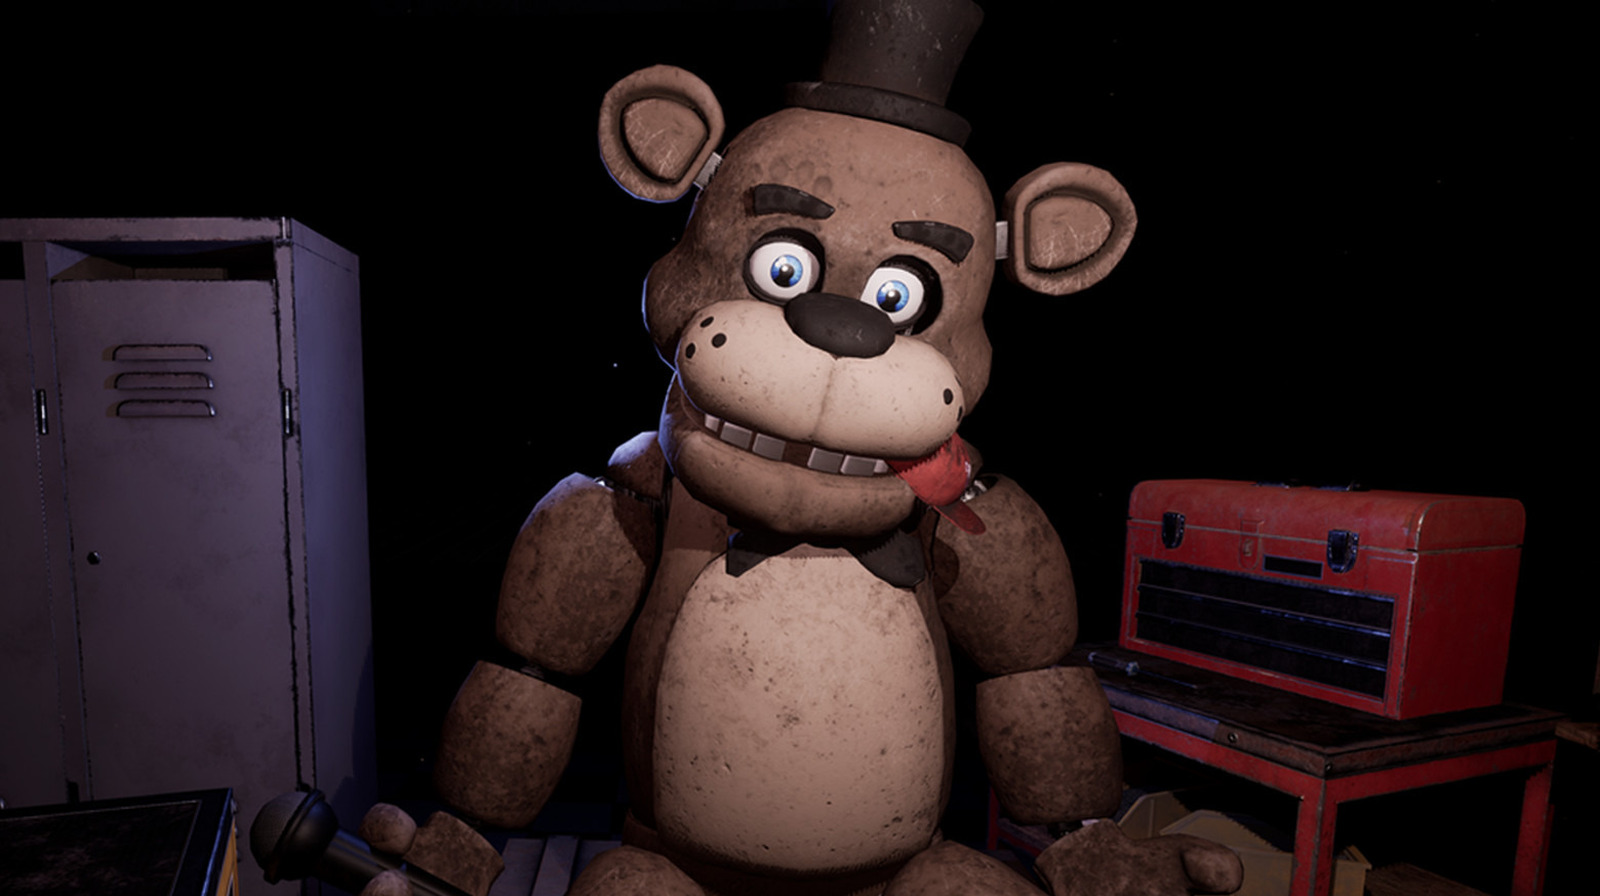 Five Nights at Freddy's review - FNAF movie is too generic